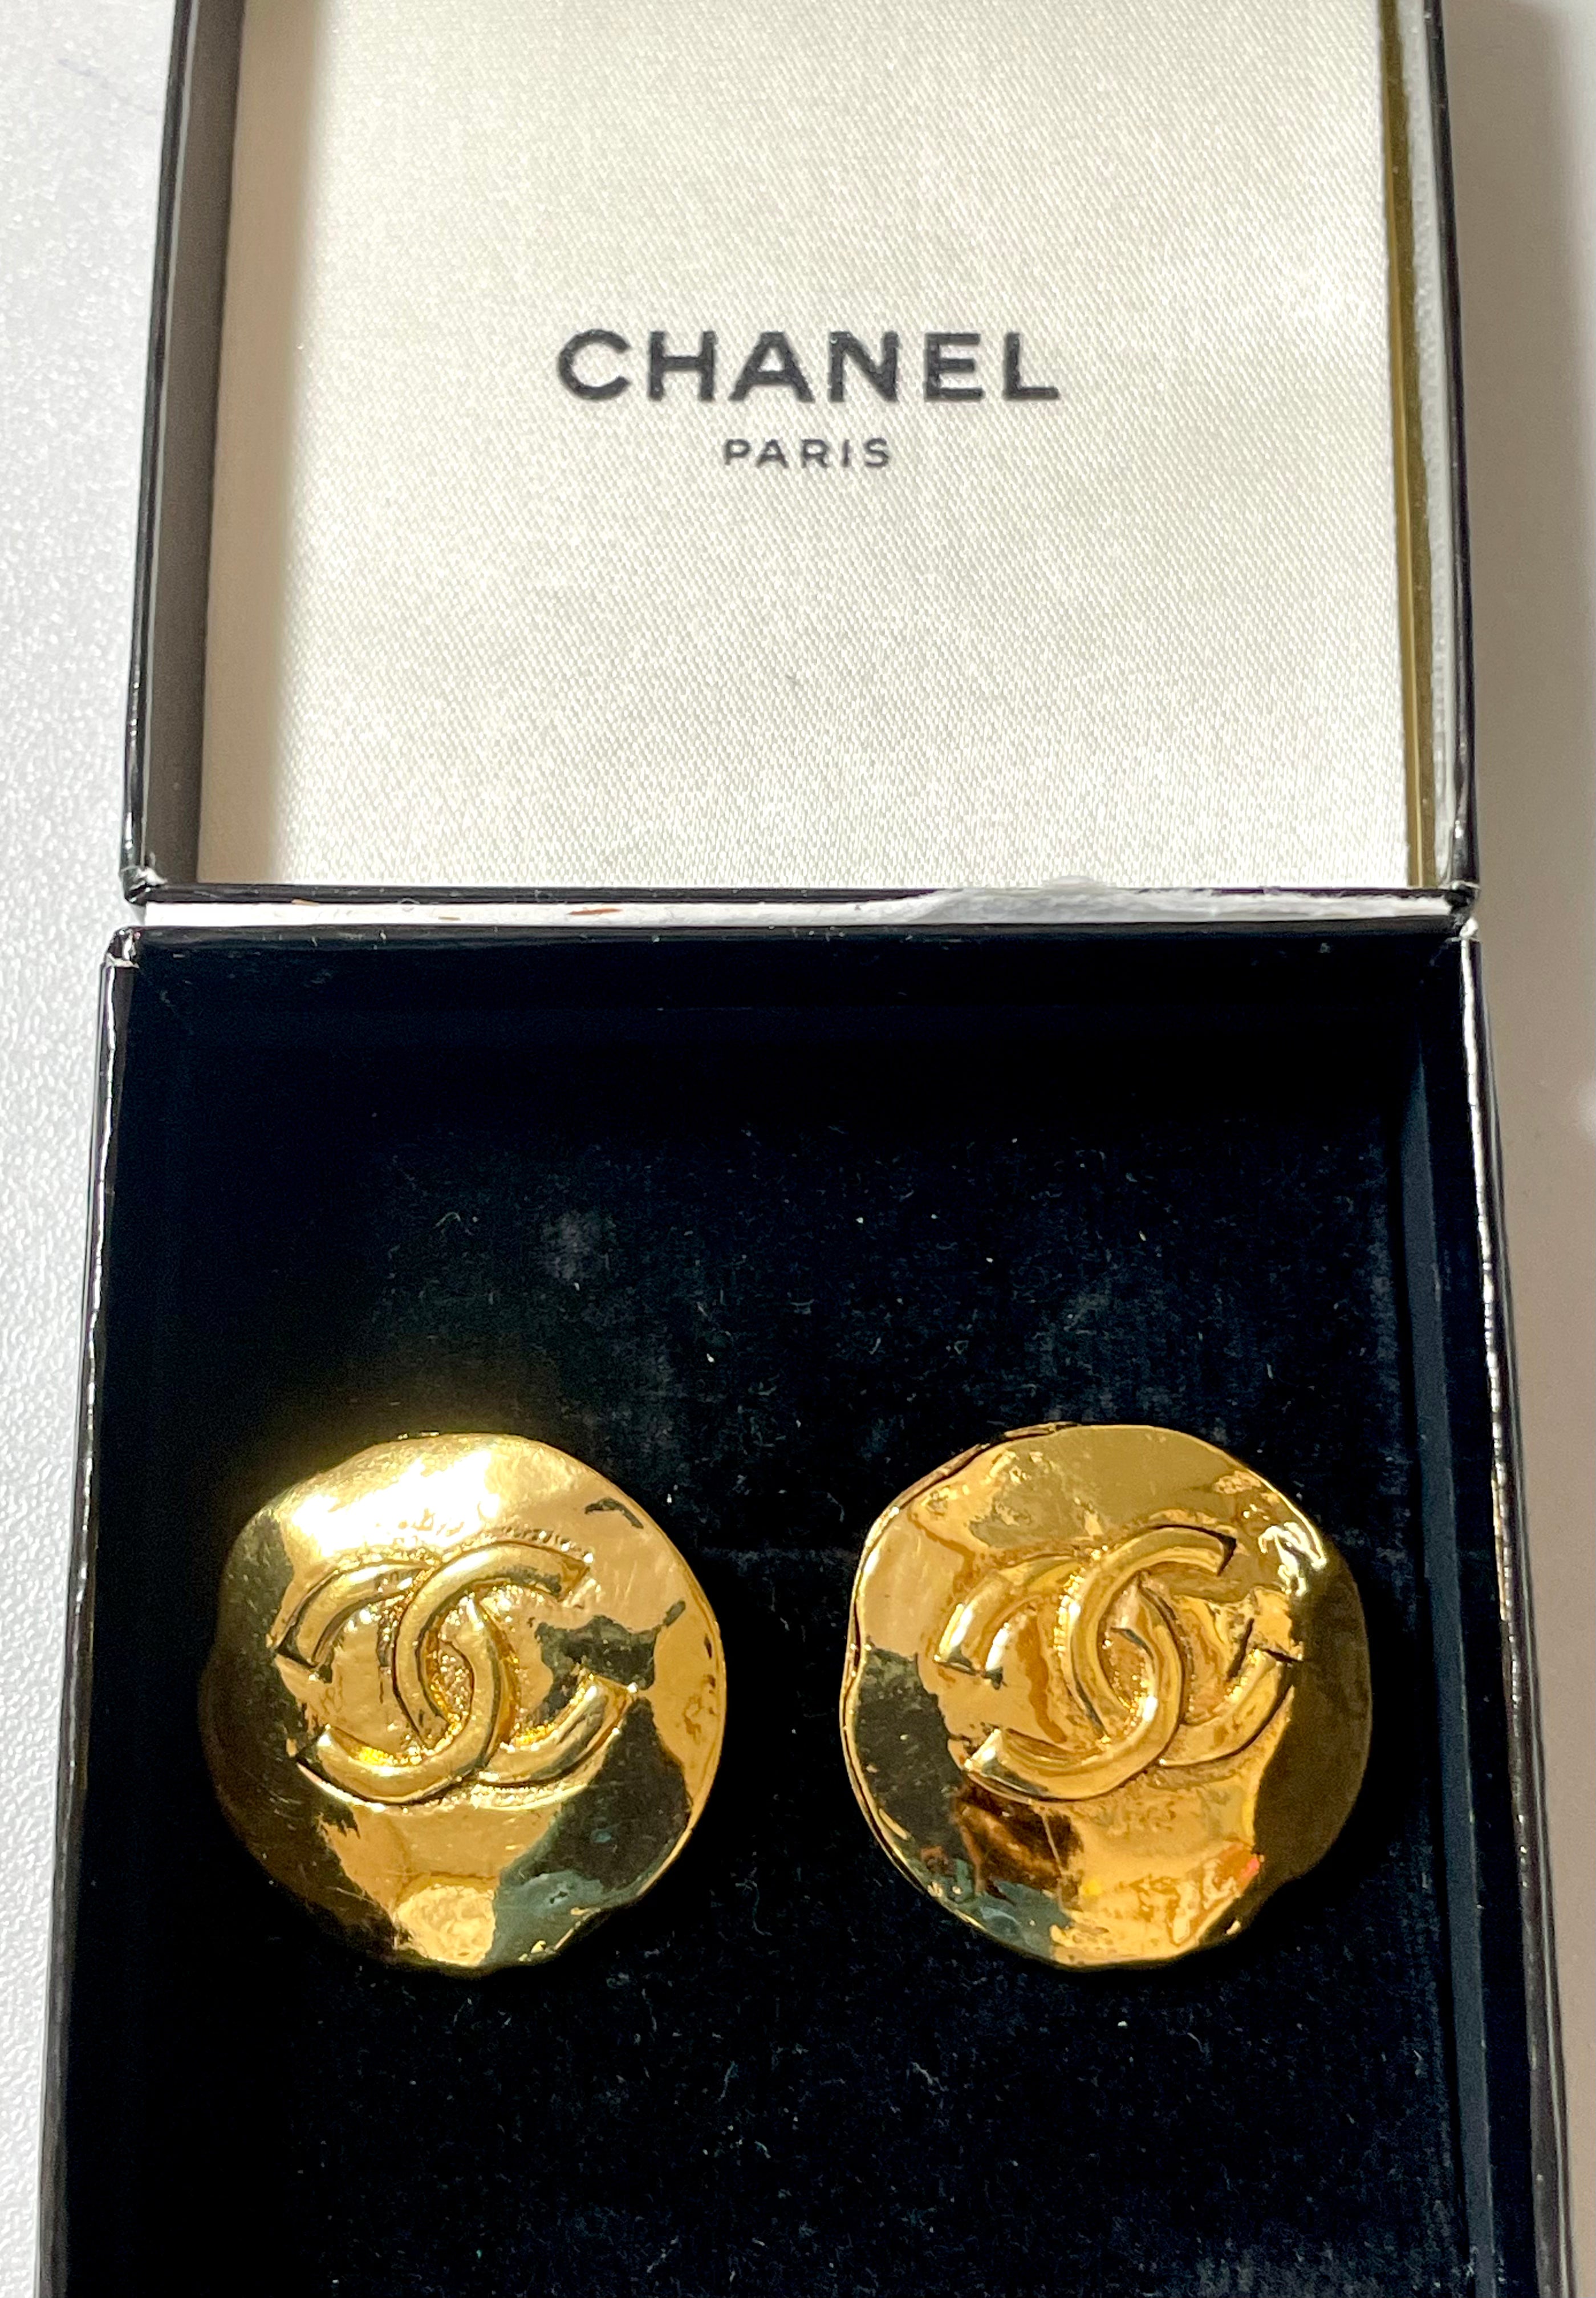 Vintage CHANEL golden round earrings with CC mark. Classic vintage Chanel jewelry. 050723ya1